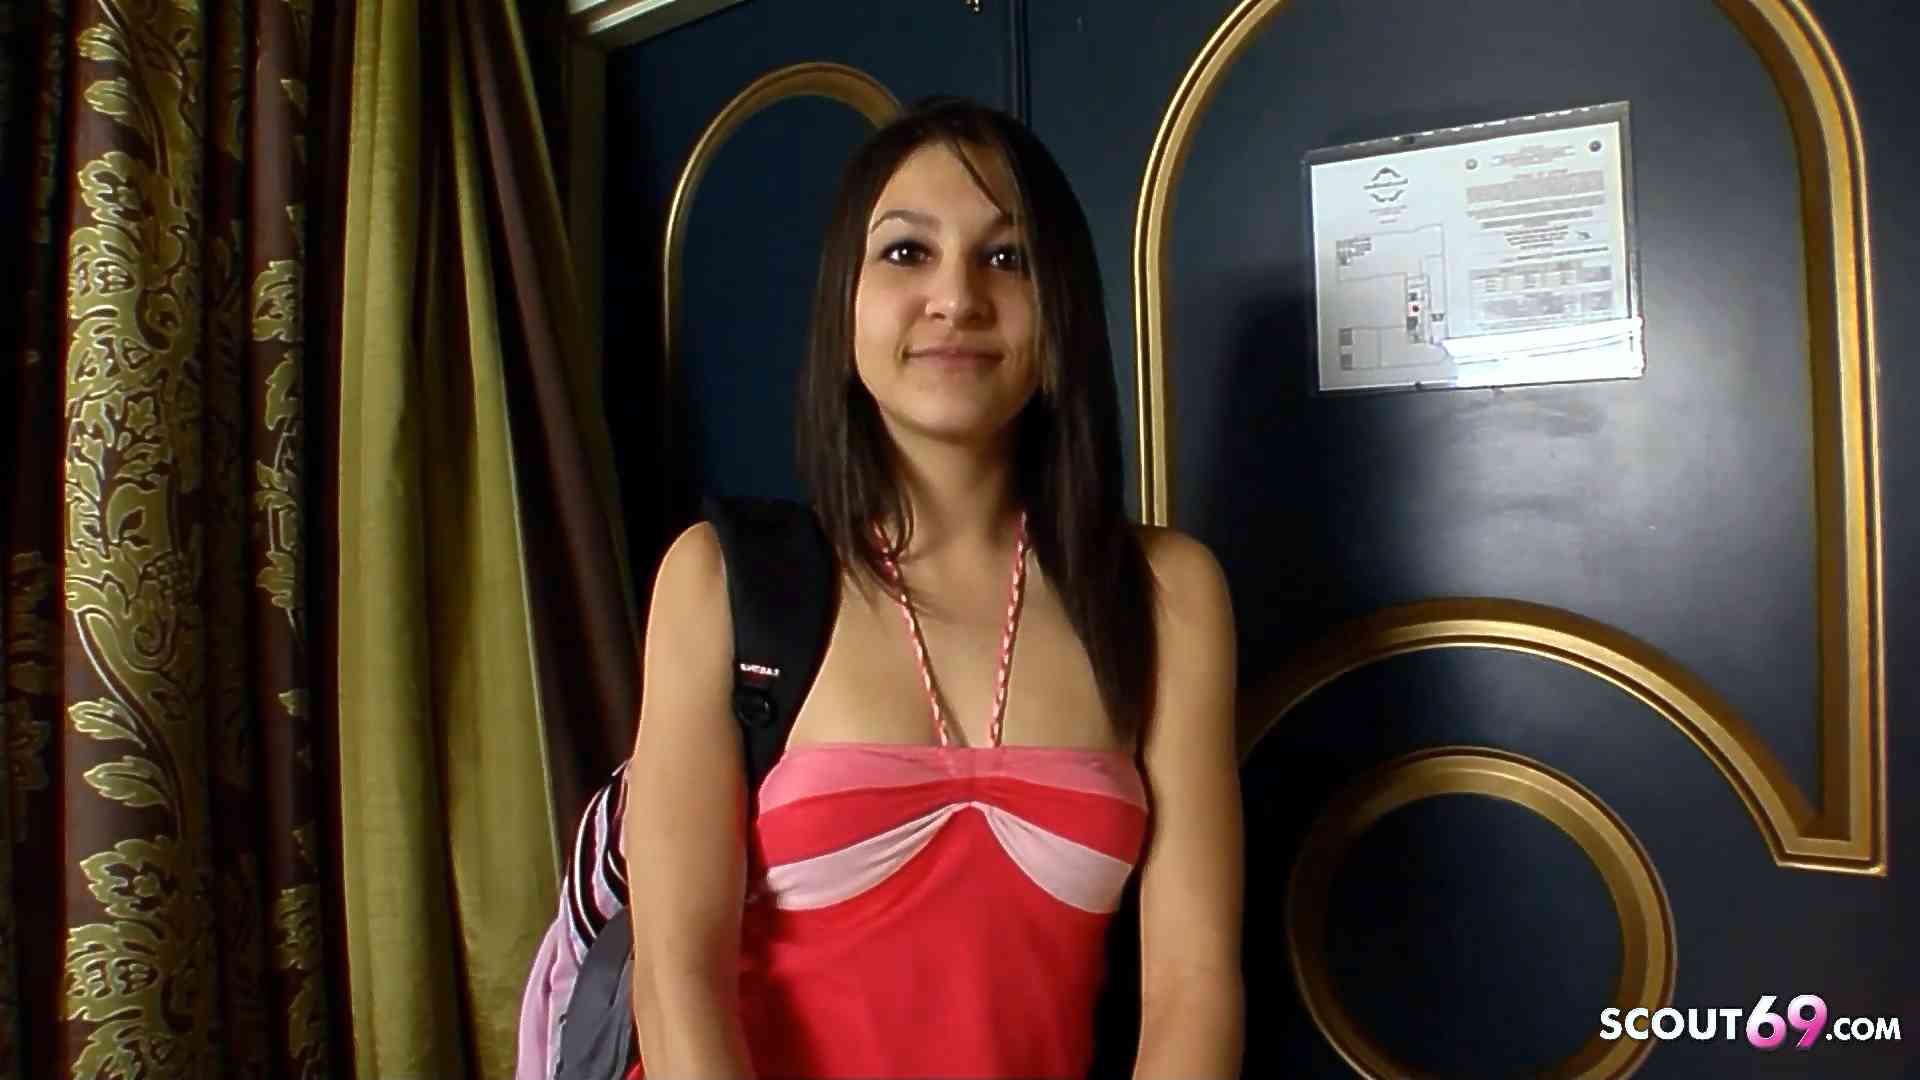 Teen Simone 18 with Small Tits Real First Time Porn Casting Sex by BWC